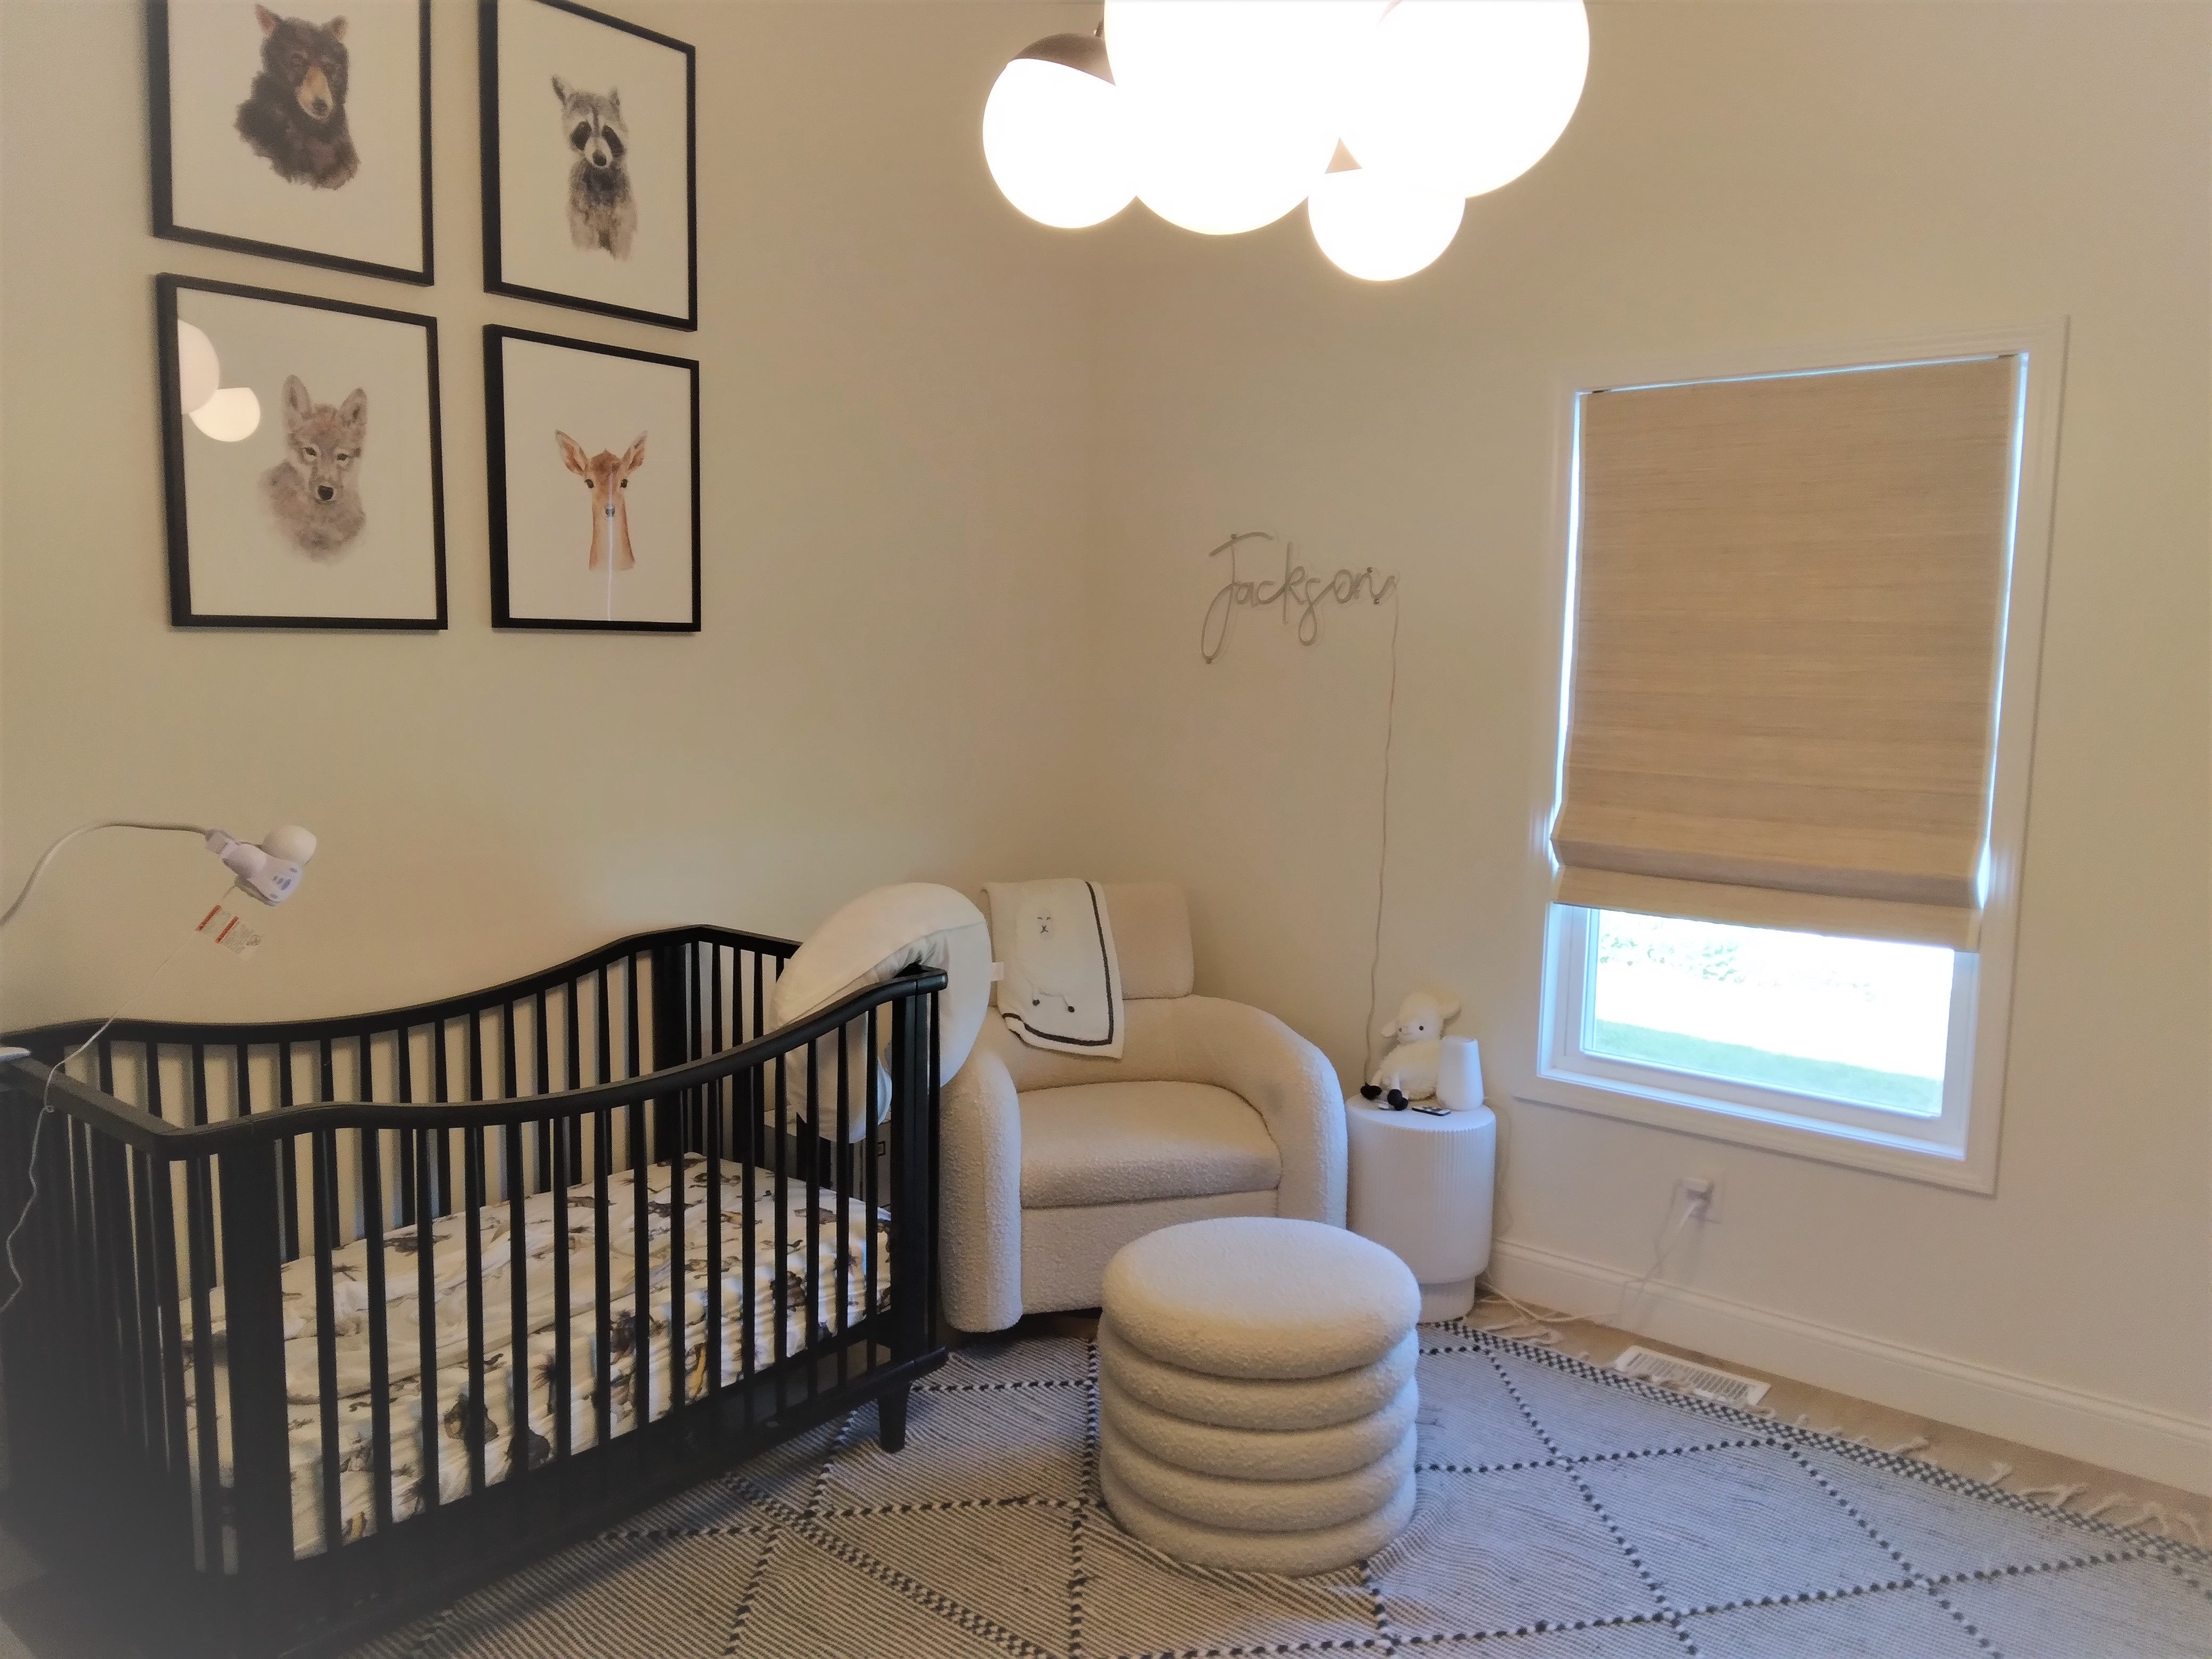 Cordless blackout natural shade in baby nursery.  BudgetBlinds  WindowCoverings  NaturalShades  SpringfieldIllinois